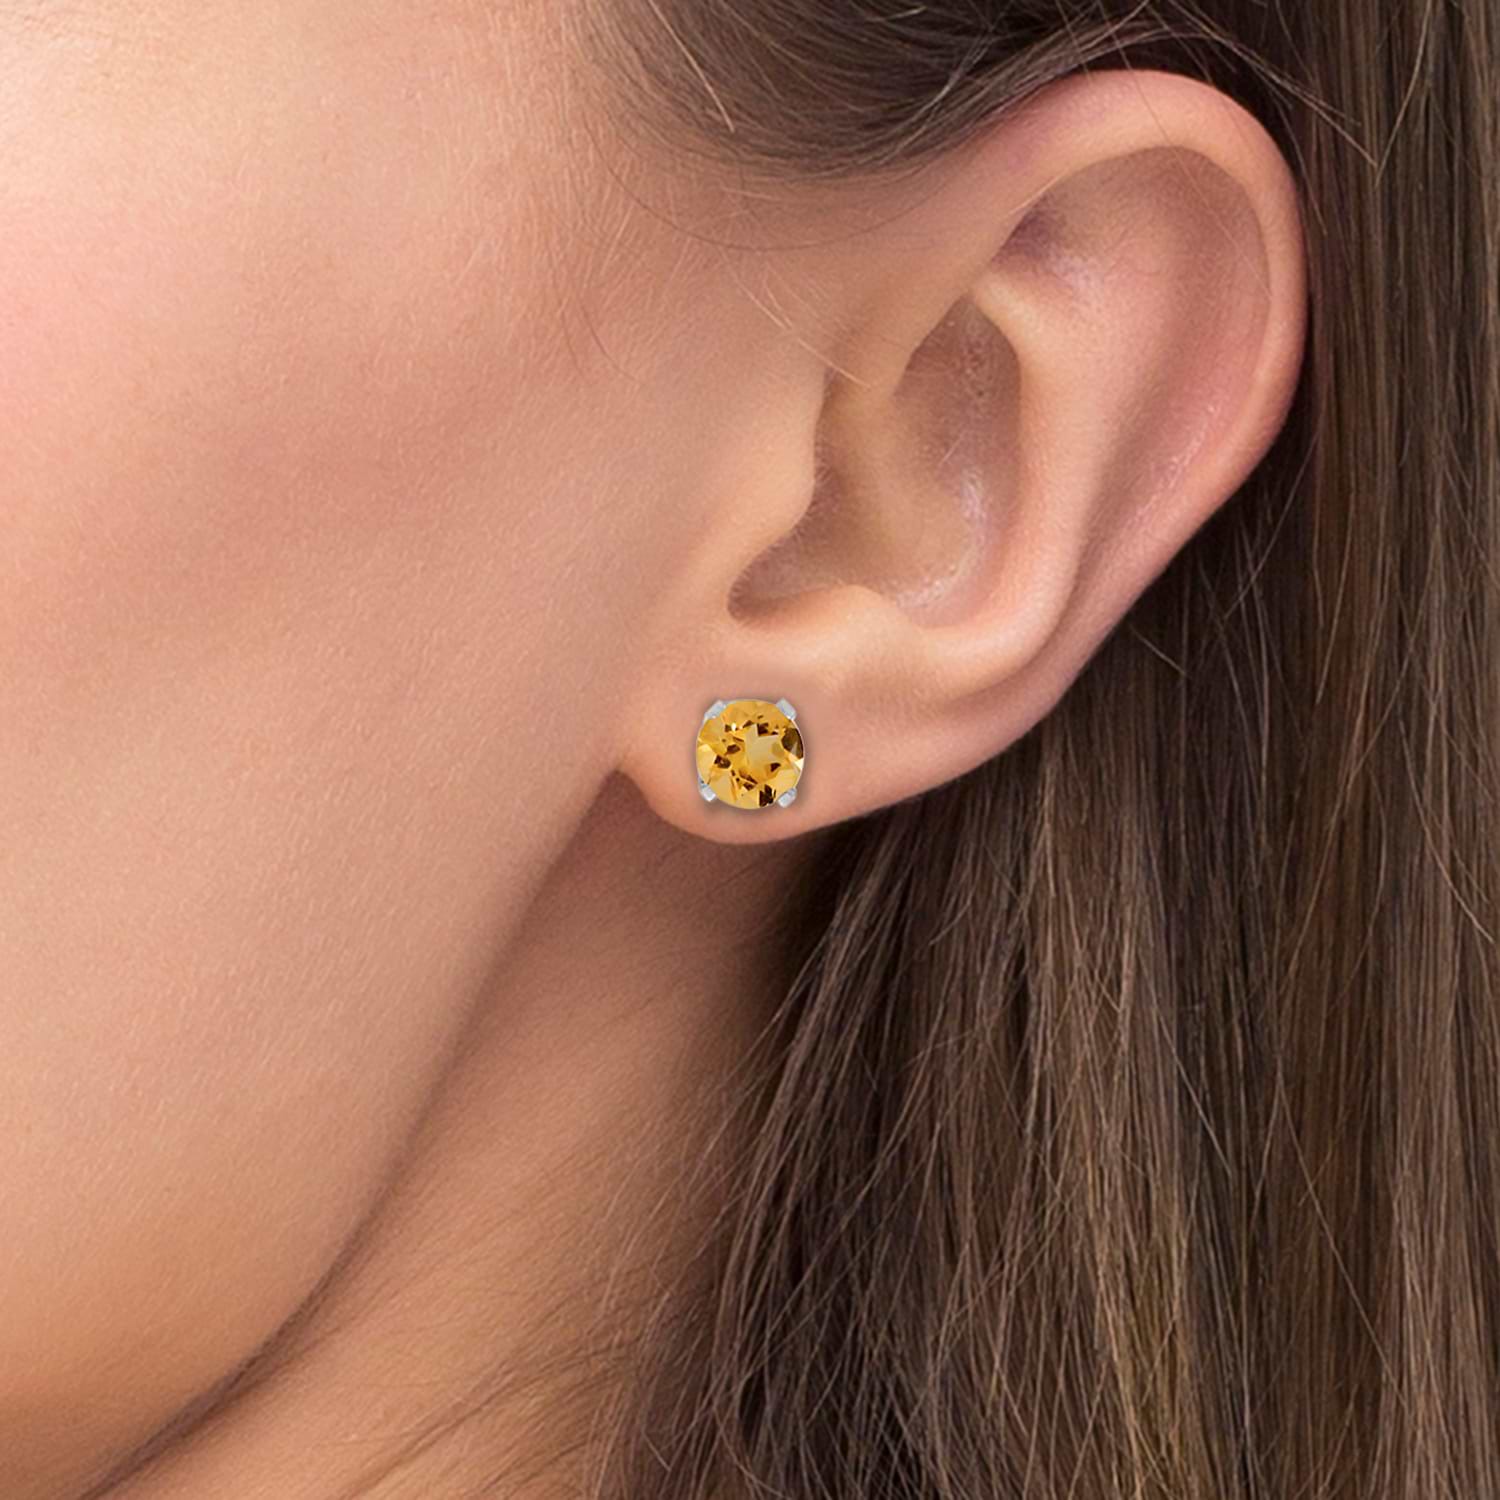 Round Citrine Stud Earrings in 14k White Gold (0.40 tcw)